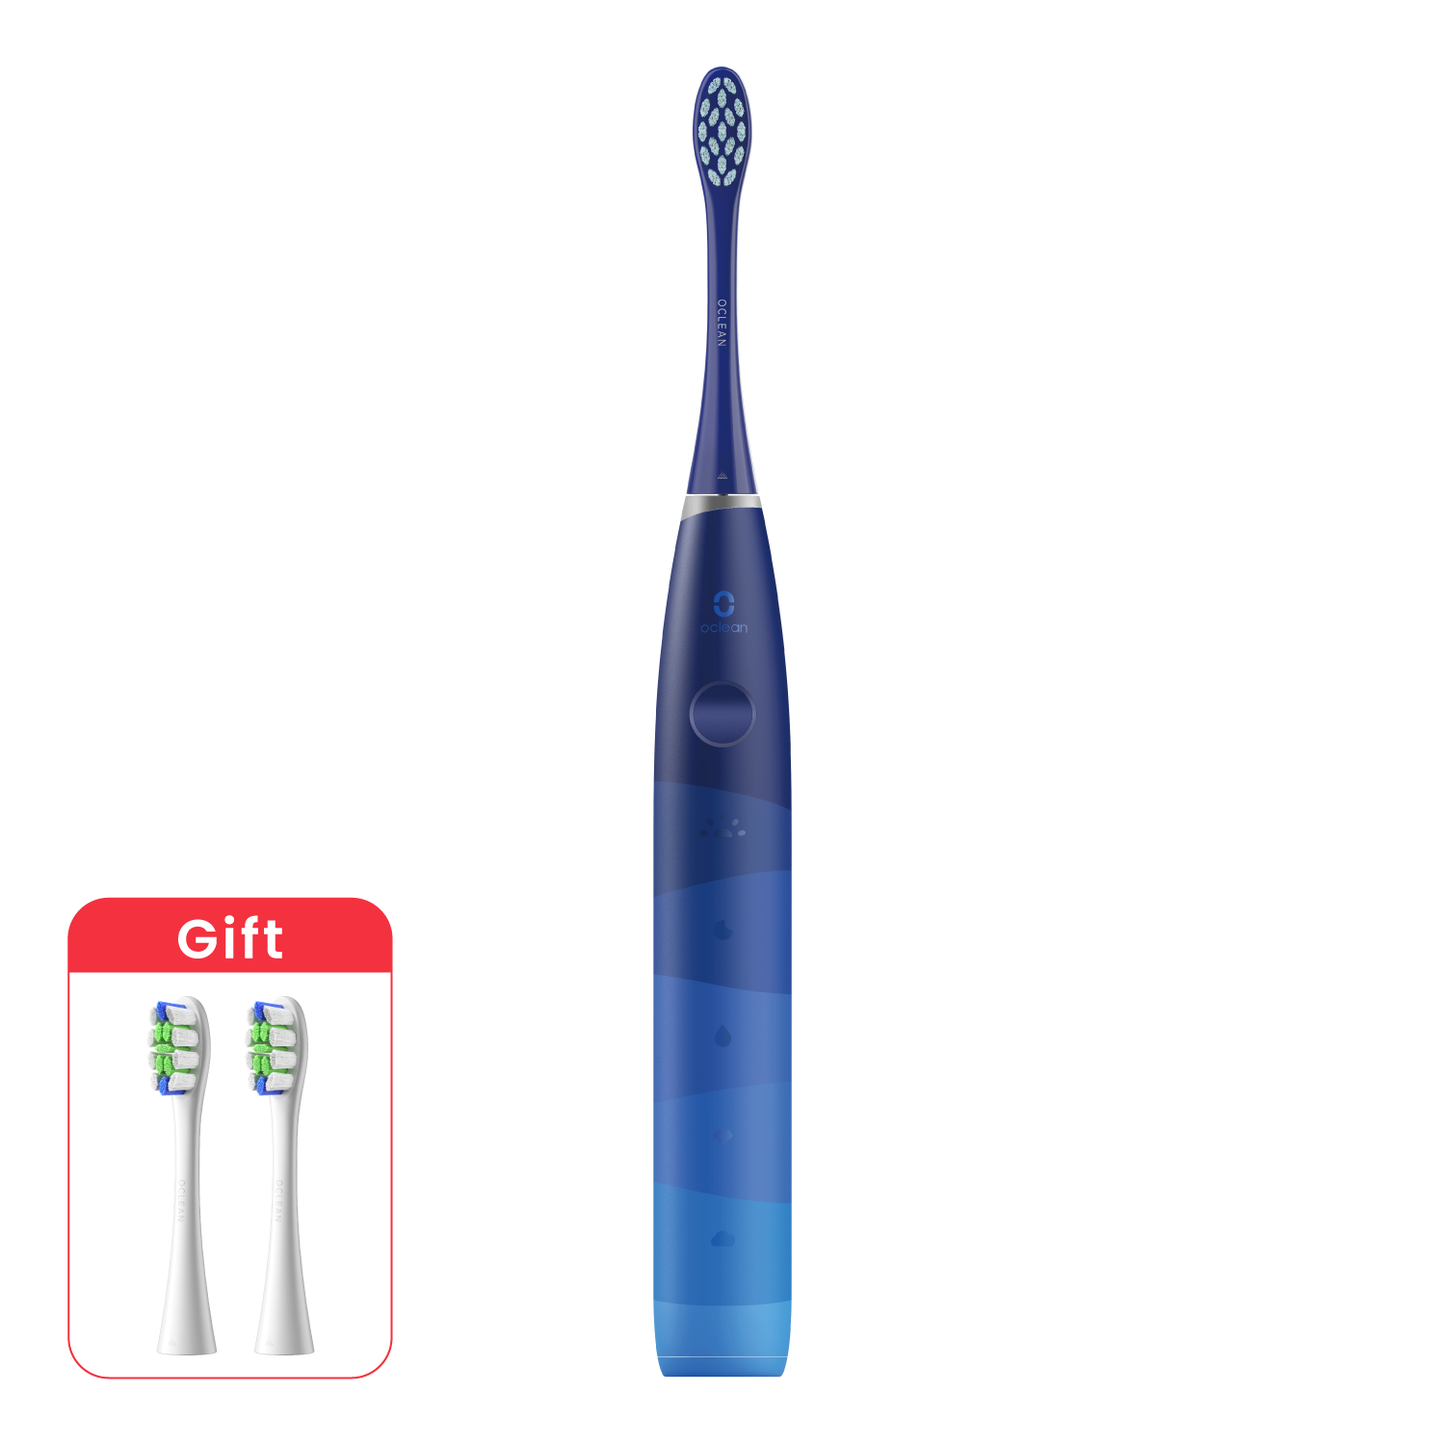 Oclean Flow Sonic Electric Toothbrush